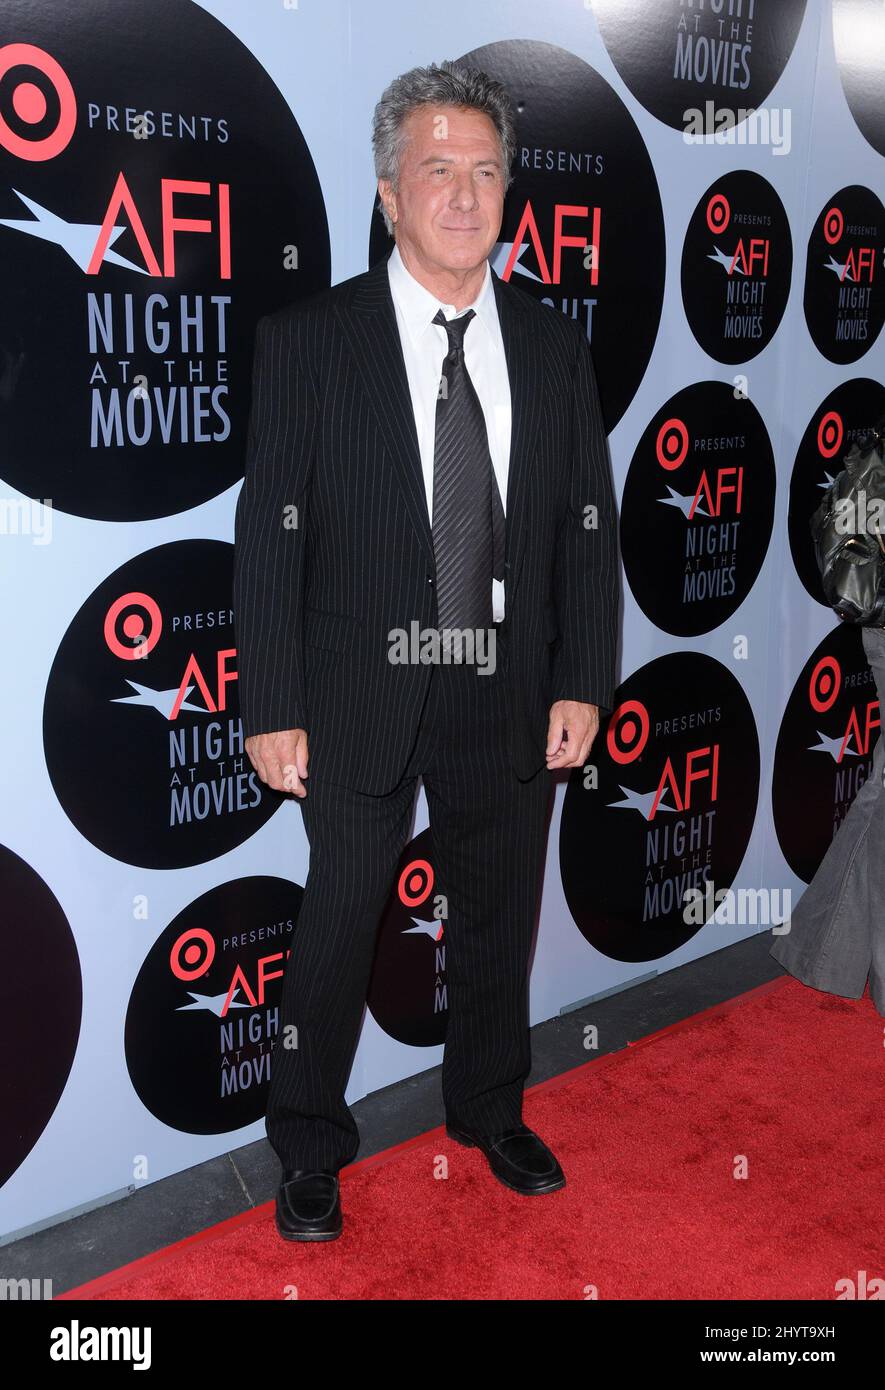 Dustin Hoffman attending TARGET Presents AFI Night at the Movies, Los Angeles. Stock Photo